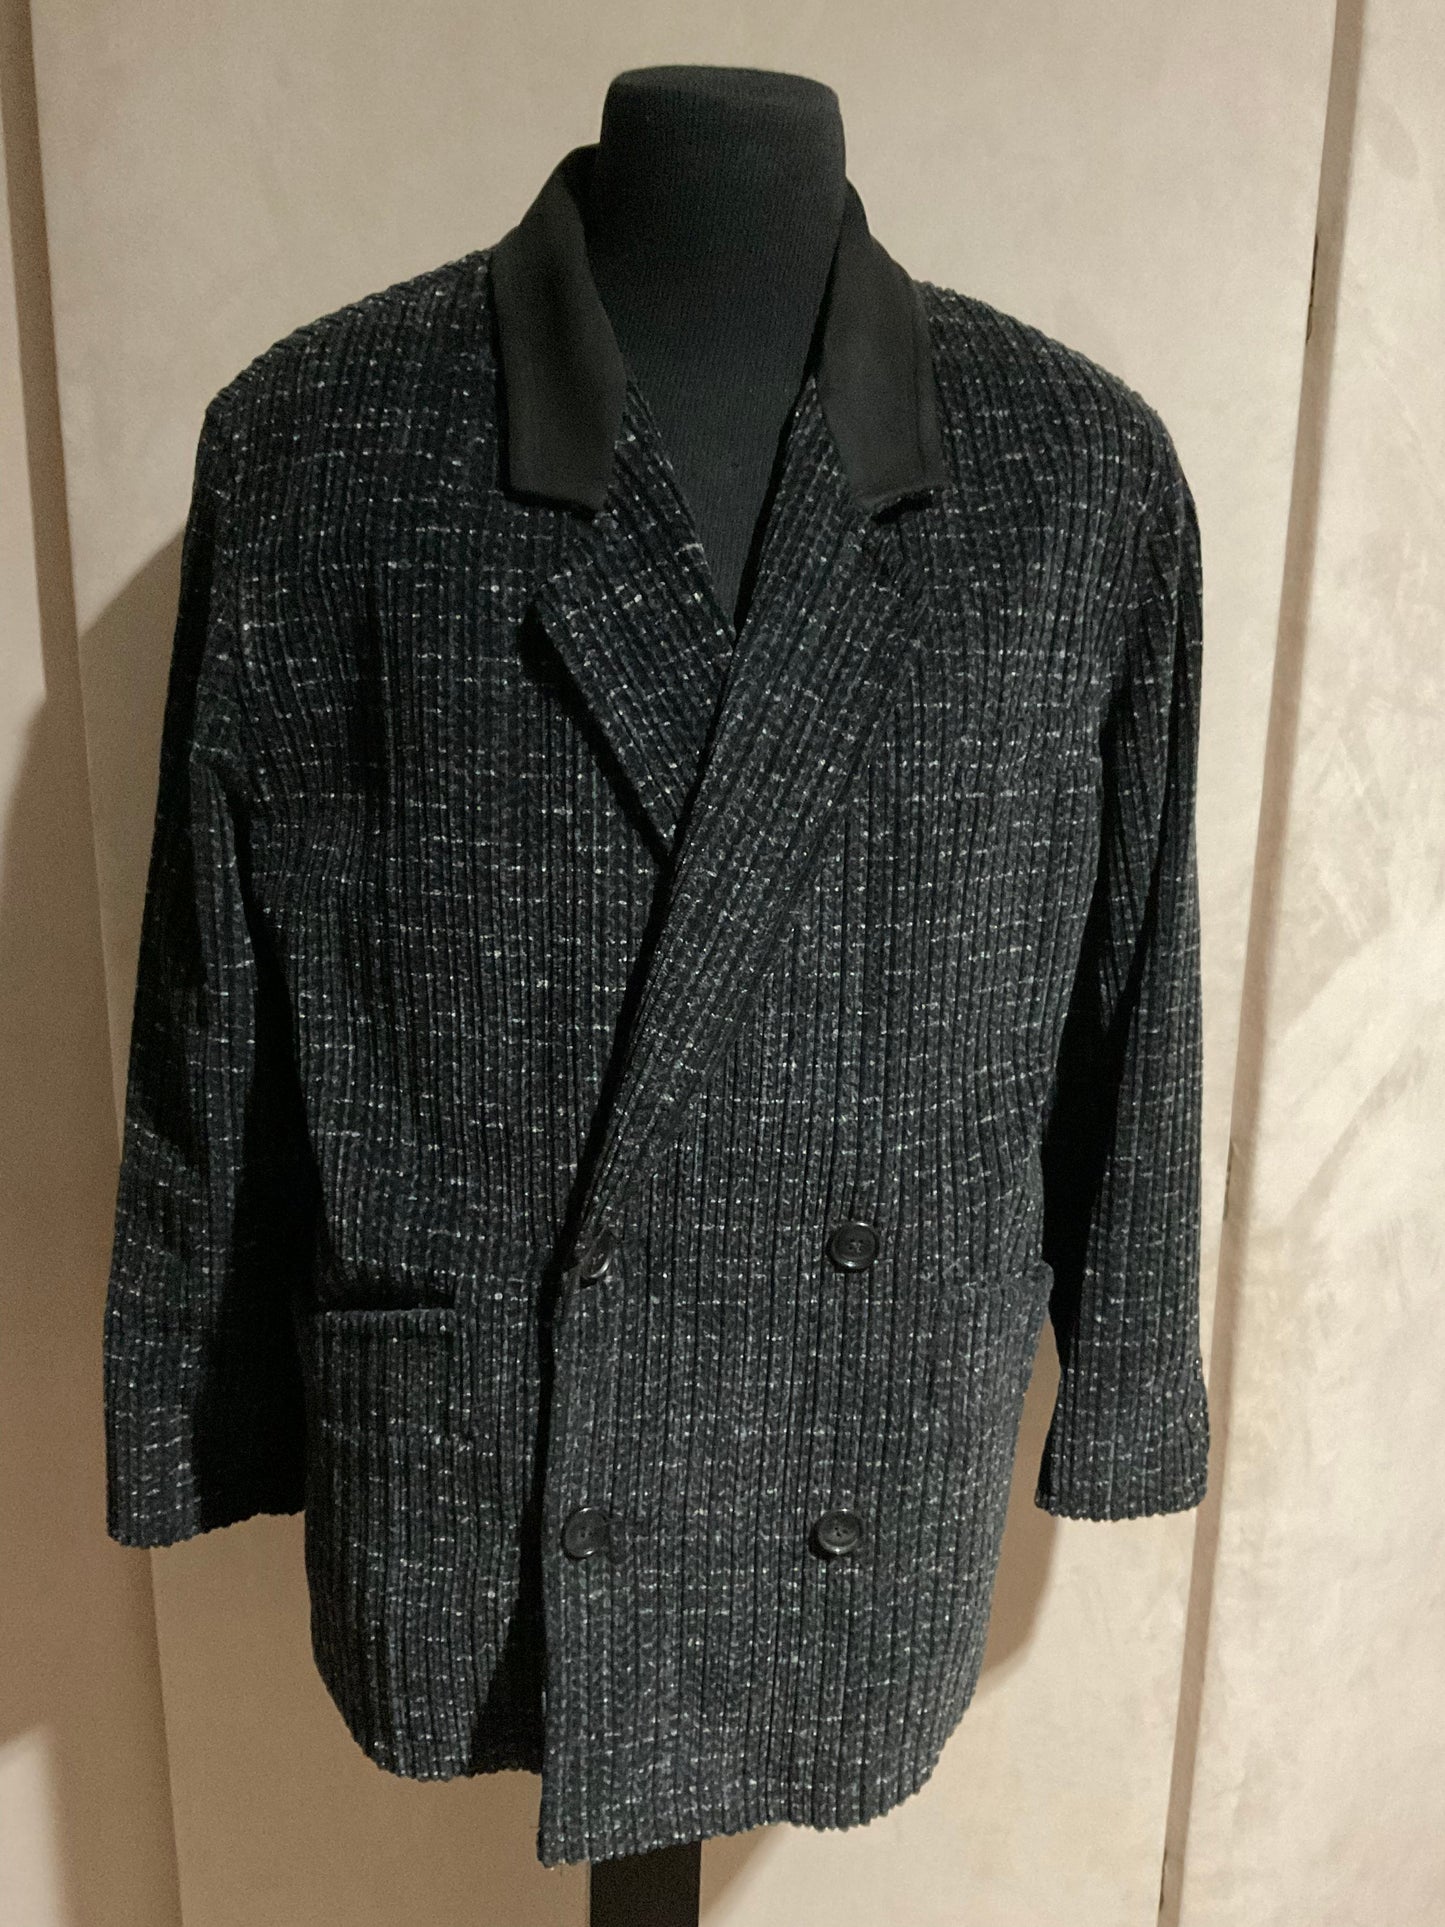 R P JACKET CORDUROY TWEED & SUEDE / DOUBLE BREASTED /  BLACK / NEW / MEDIUM - LARGE / MADE IN ITALY